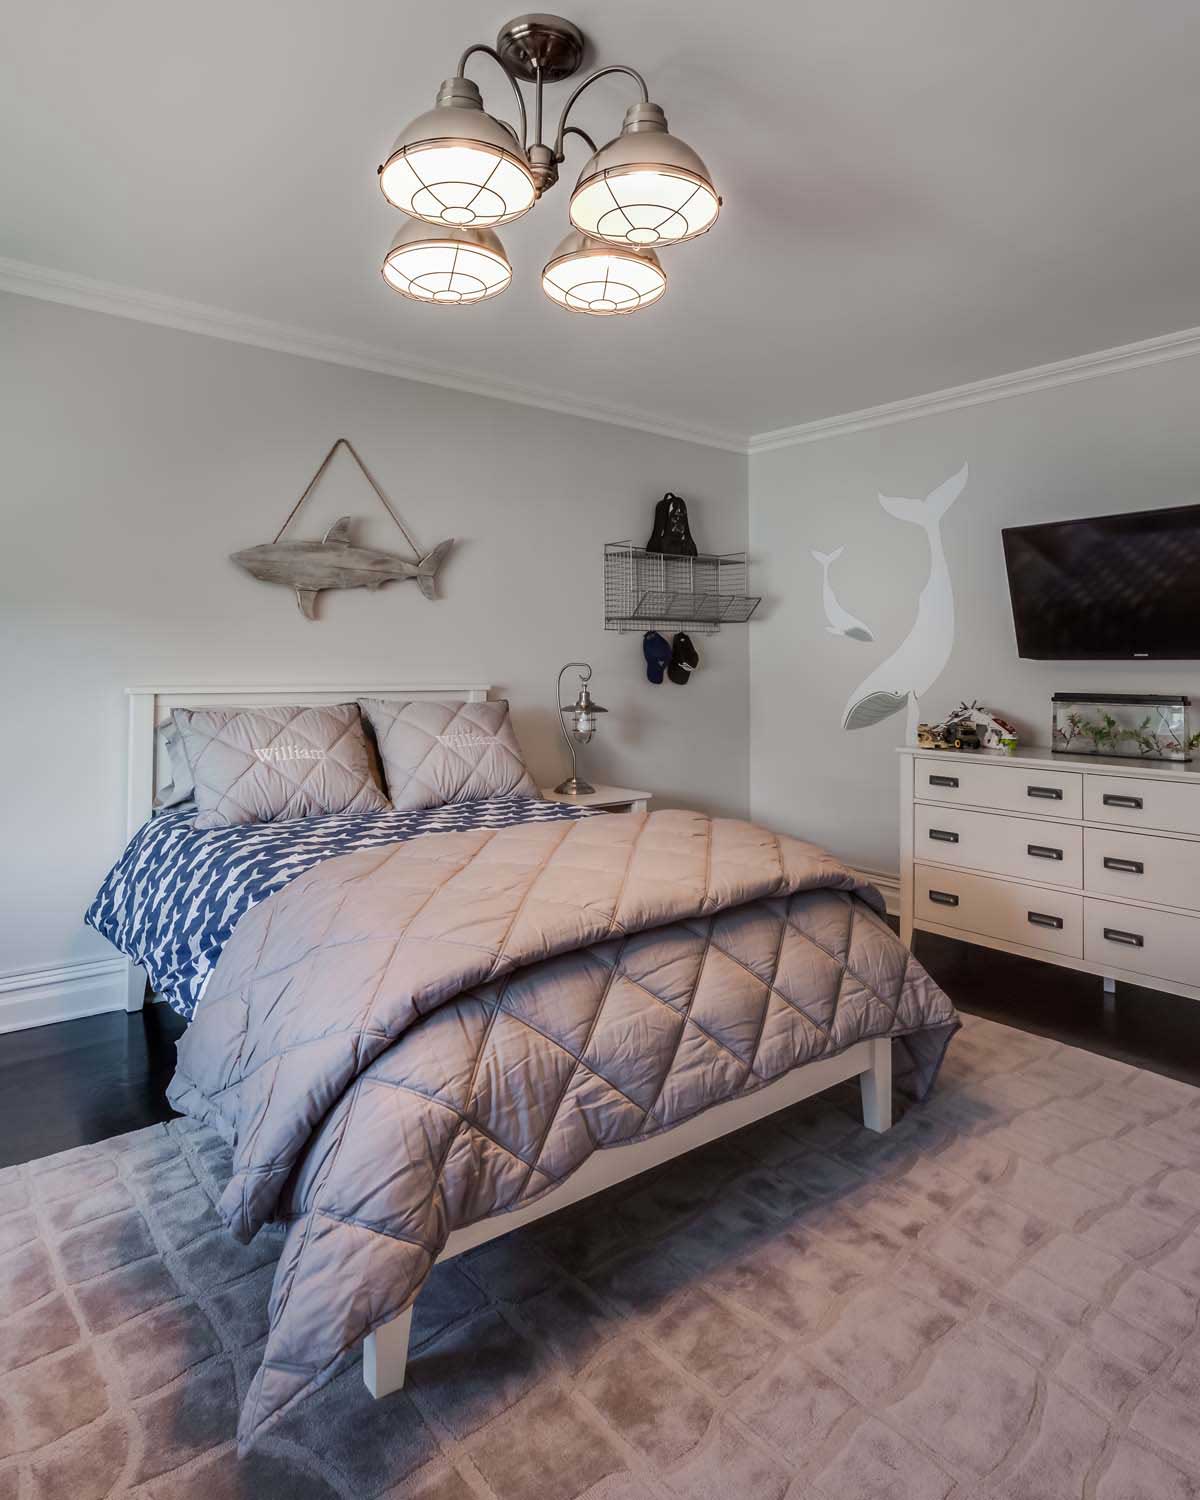 100 Bedroom Lighting Ideas to Add Sparkle to Your Bedroom - Homeluf